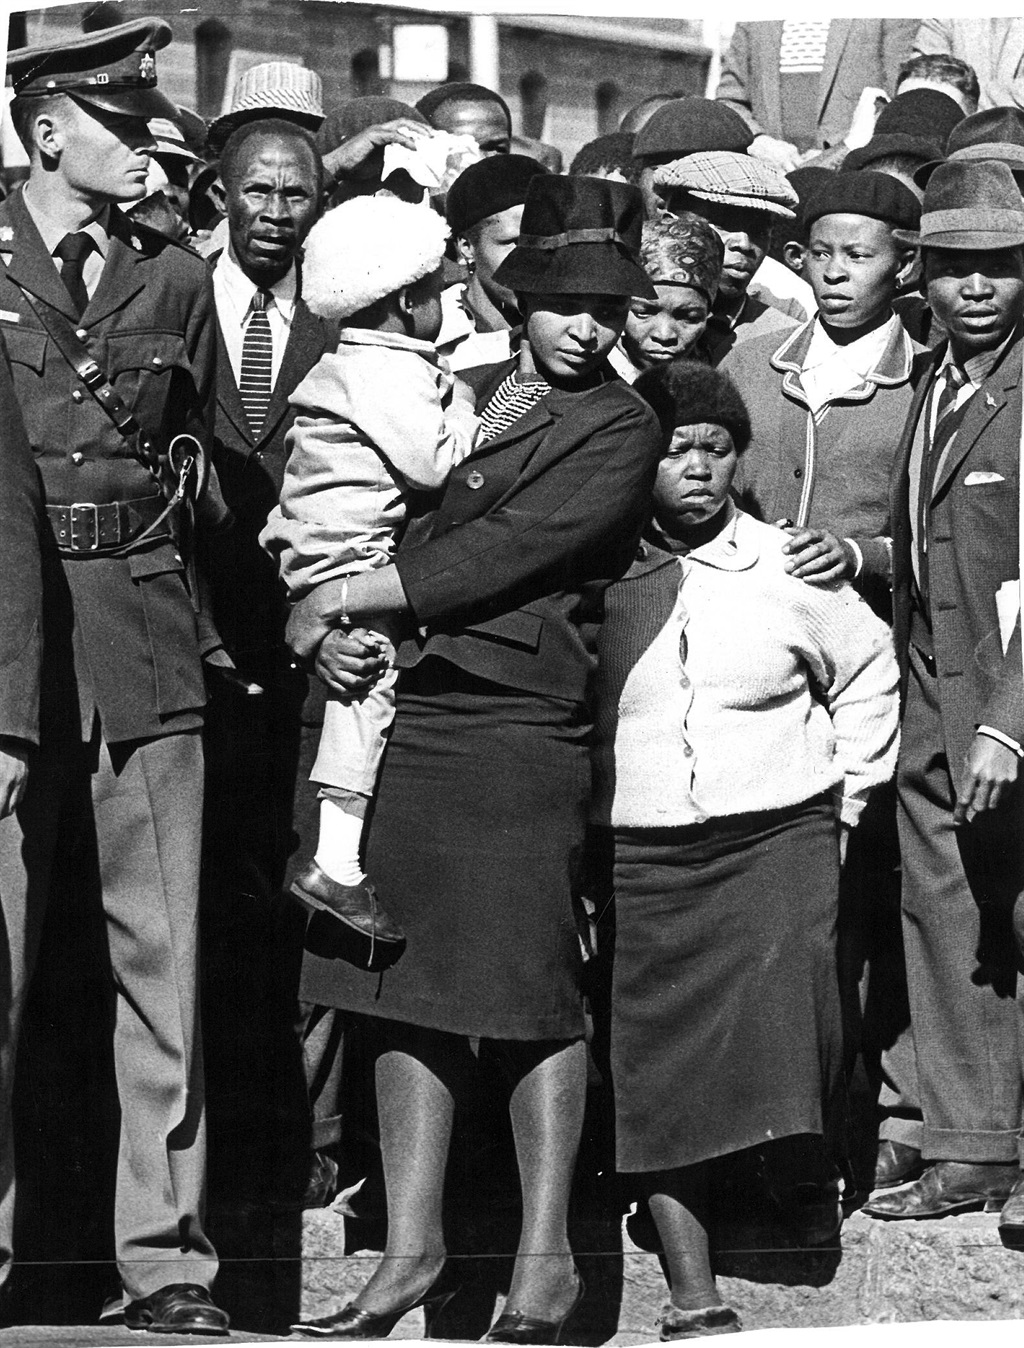 Winnie outside the Palace of Justice in Pretoria during the Rivonia Trial, in which her husband stood accused of treason and which led to him being convicted to life in prison on Robben Island. She is holding a small child, however, the caption for this picture from the Media24 archives does not say which child she is holding. Presumably it is her youngest daughter, Zindzi, who was three years old when the trial started in October 1963